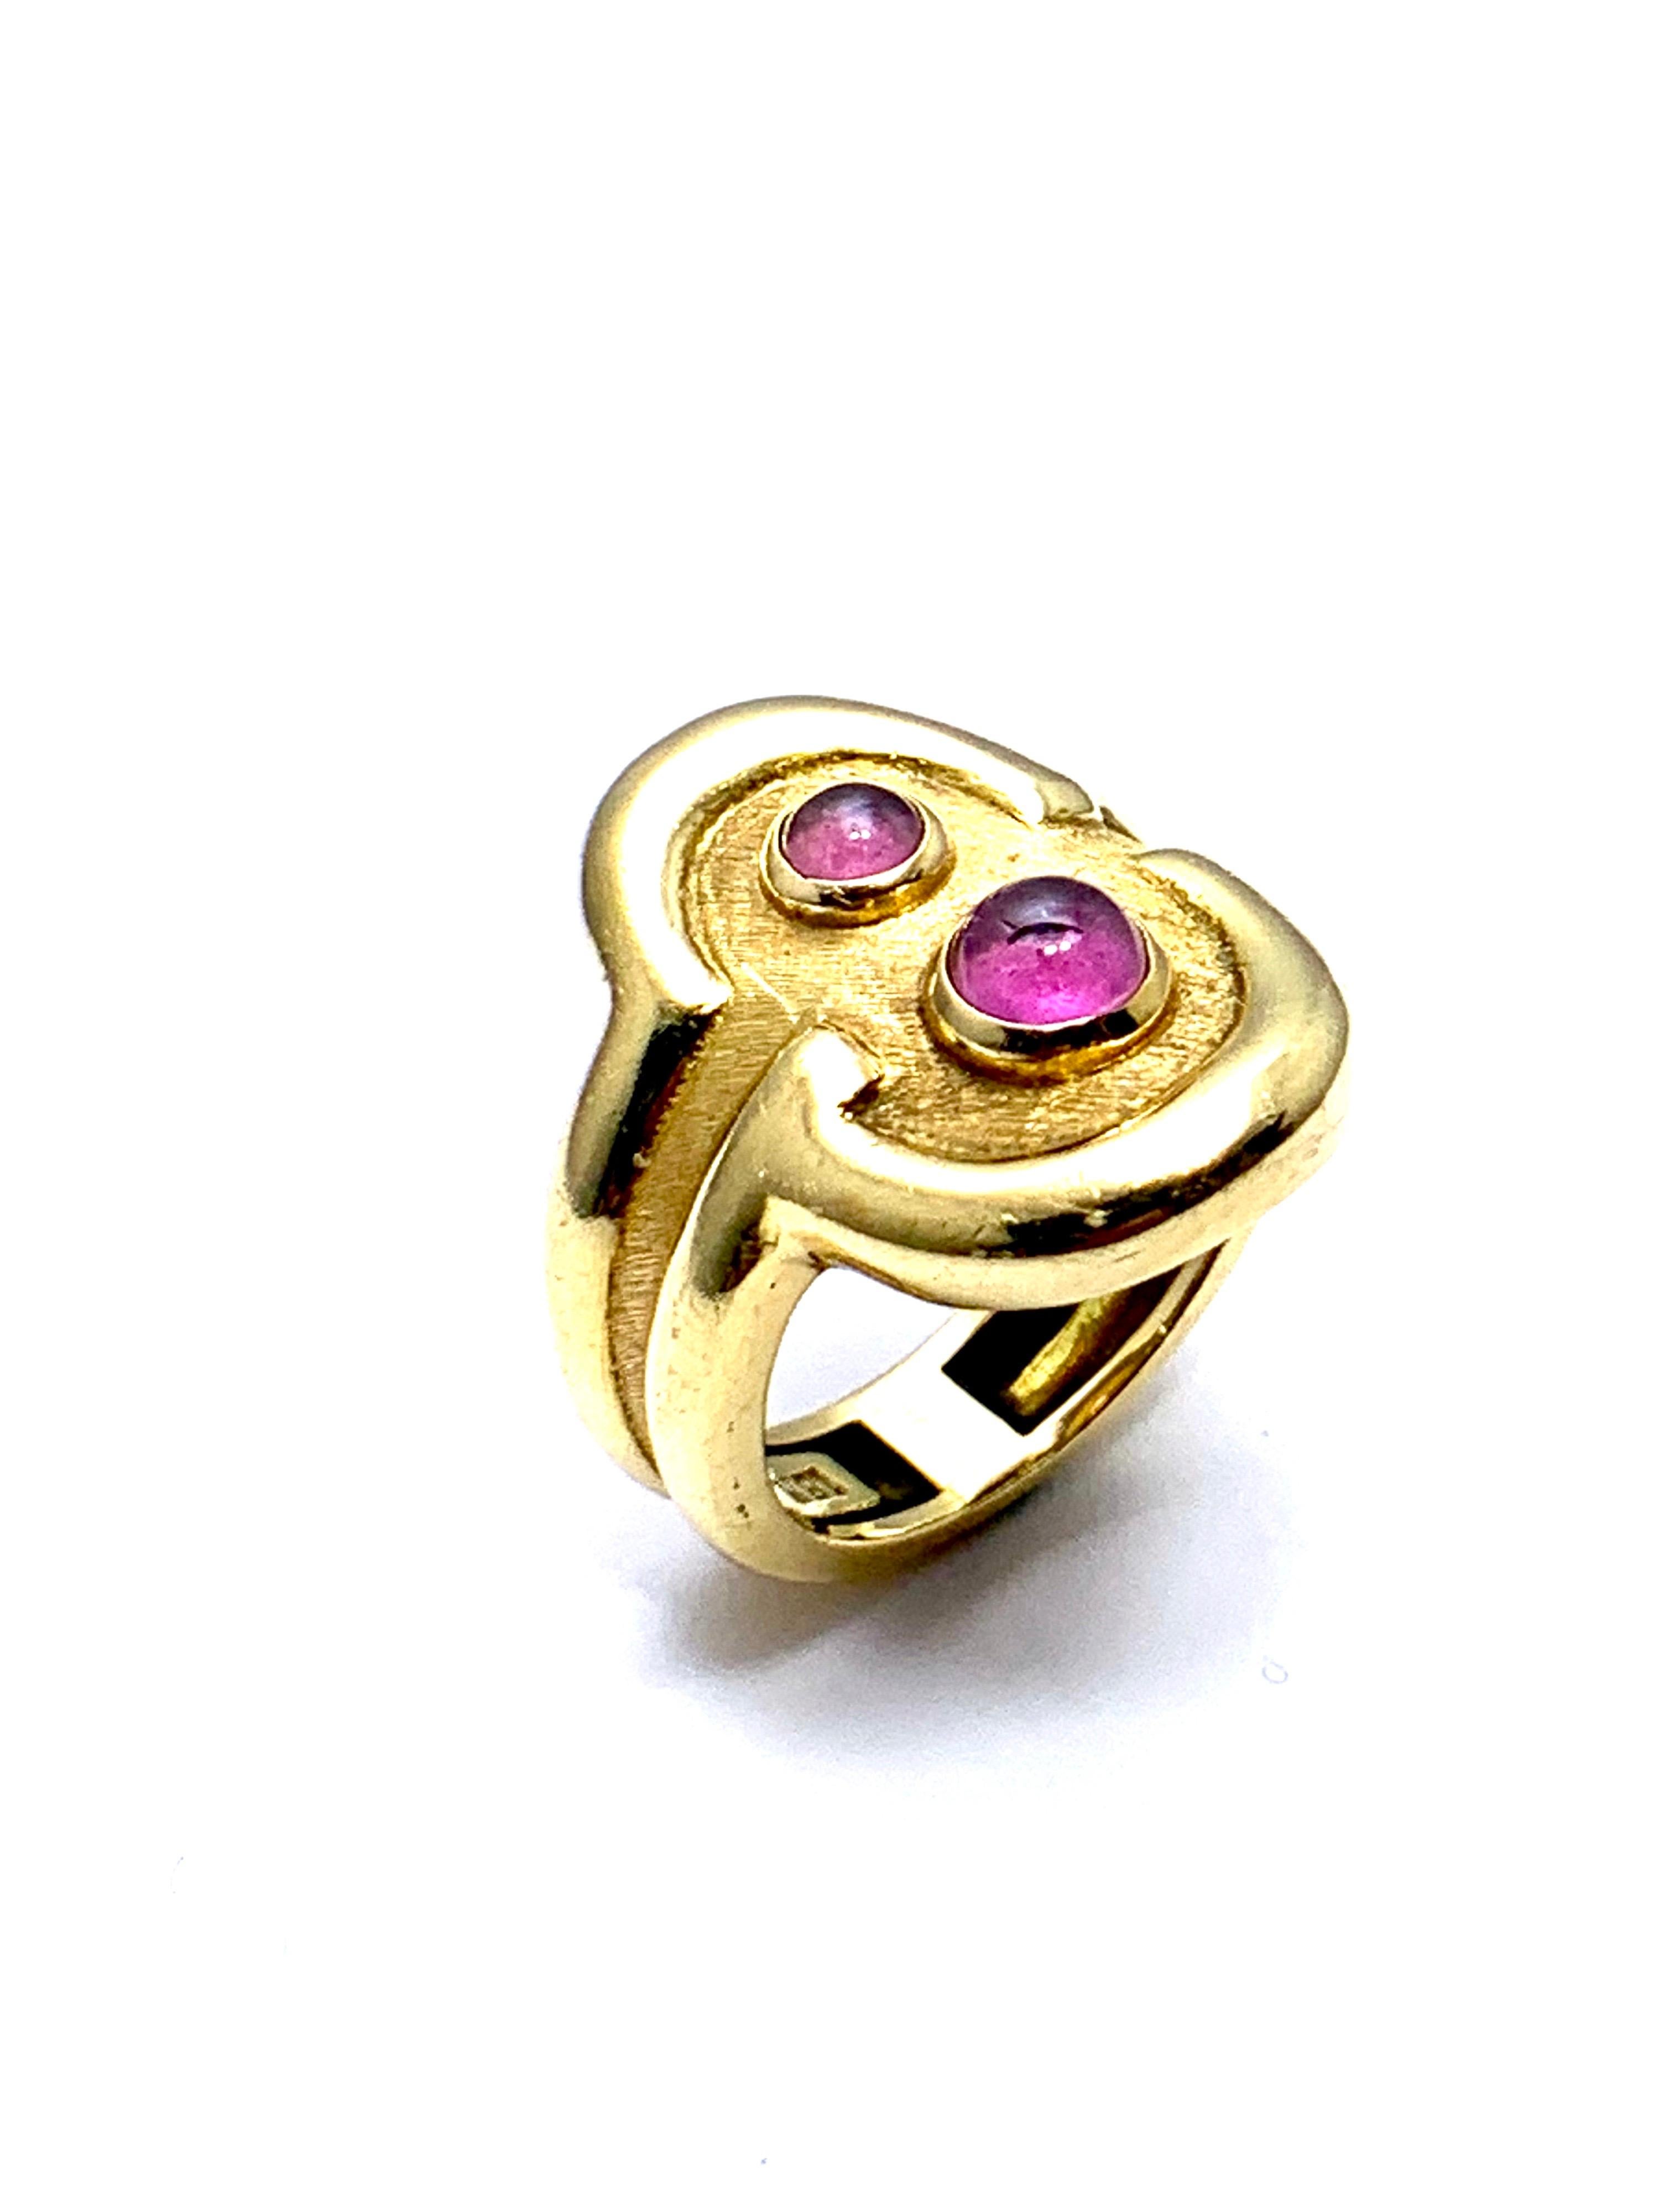 A beautiful Pink Tourmaline ring designed by Burle Marx. The 0.48 carat cabochon Pink Tourmaline displays a light pink hue, bezel set in an 18 karat yellow gold abstarct design ring. The inside shank is signed 